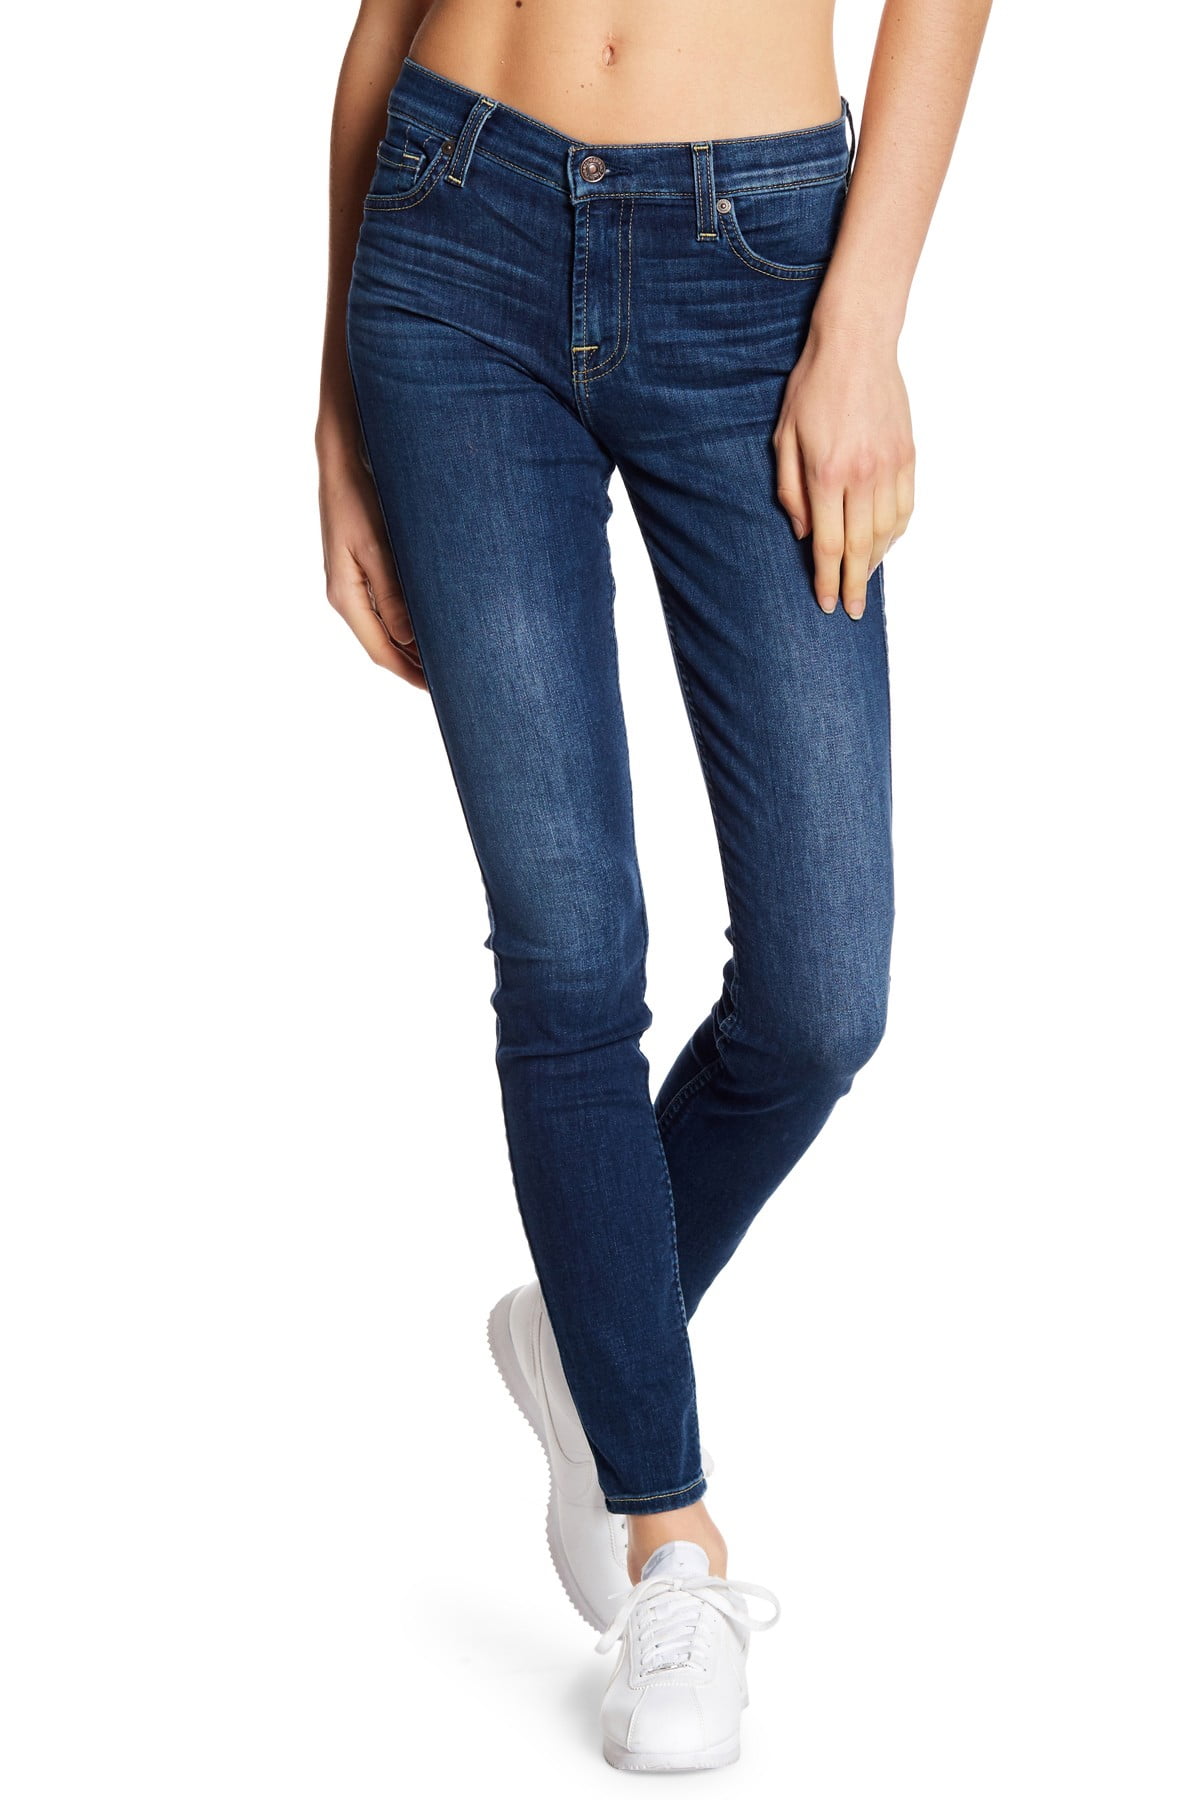 7 for all mankind the skinny jean